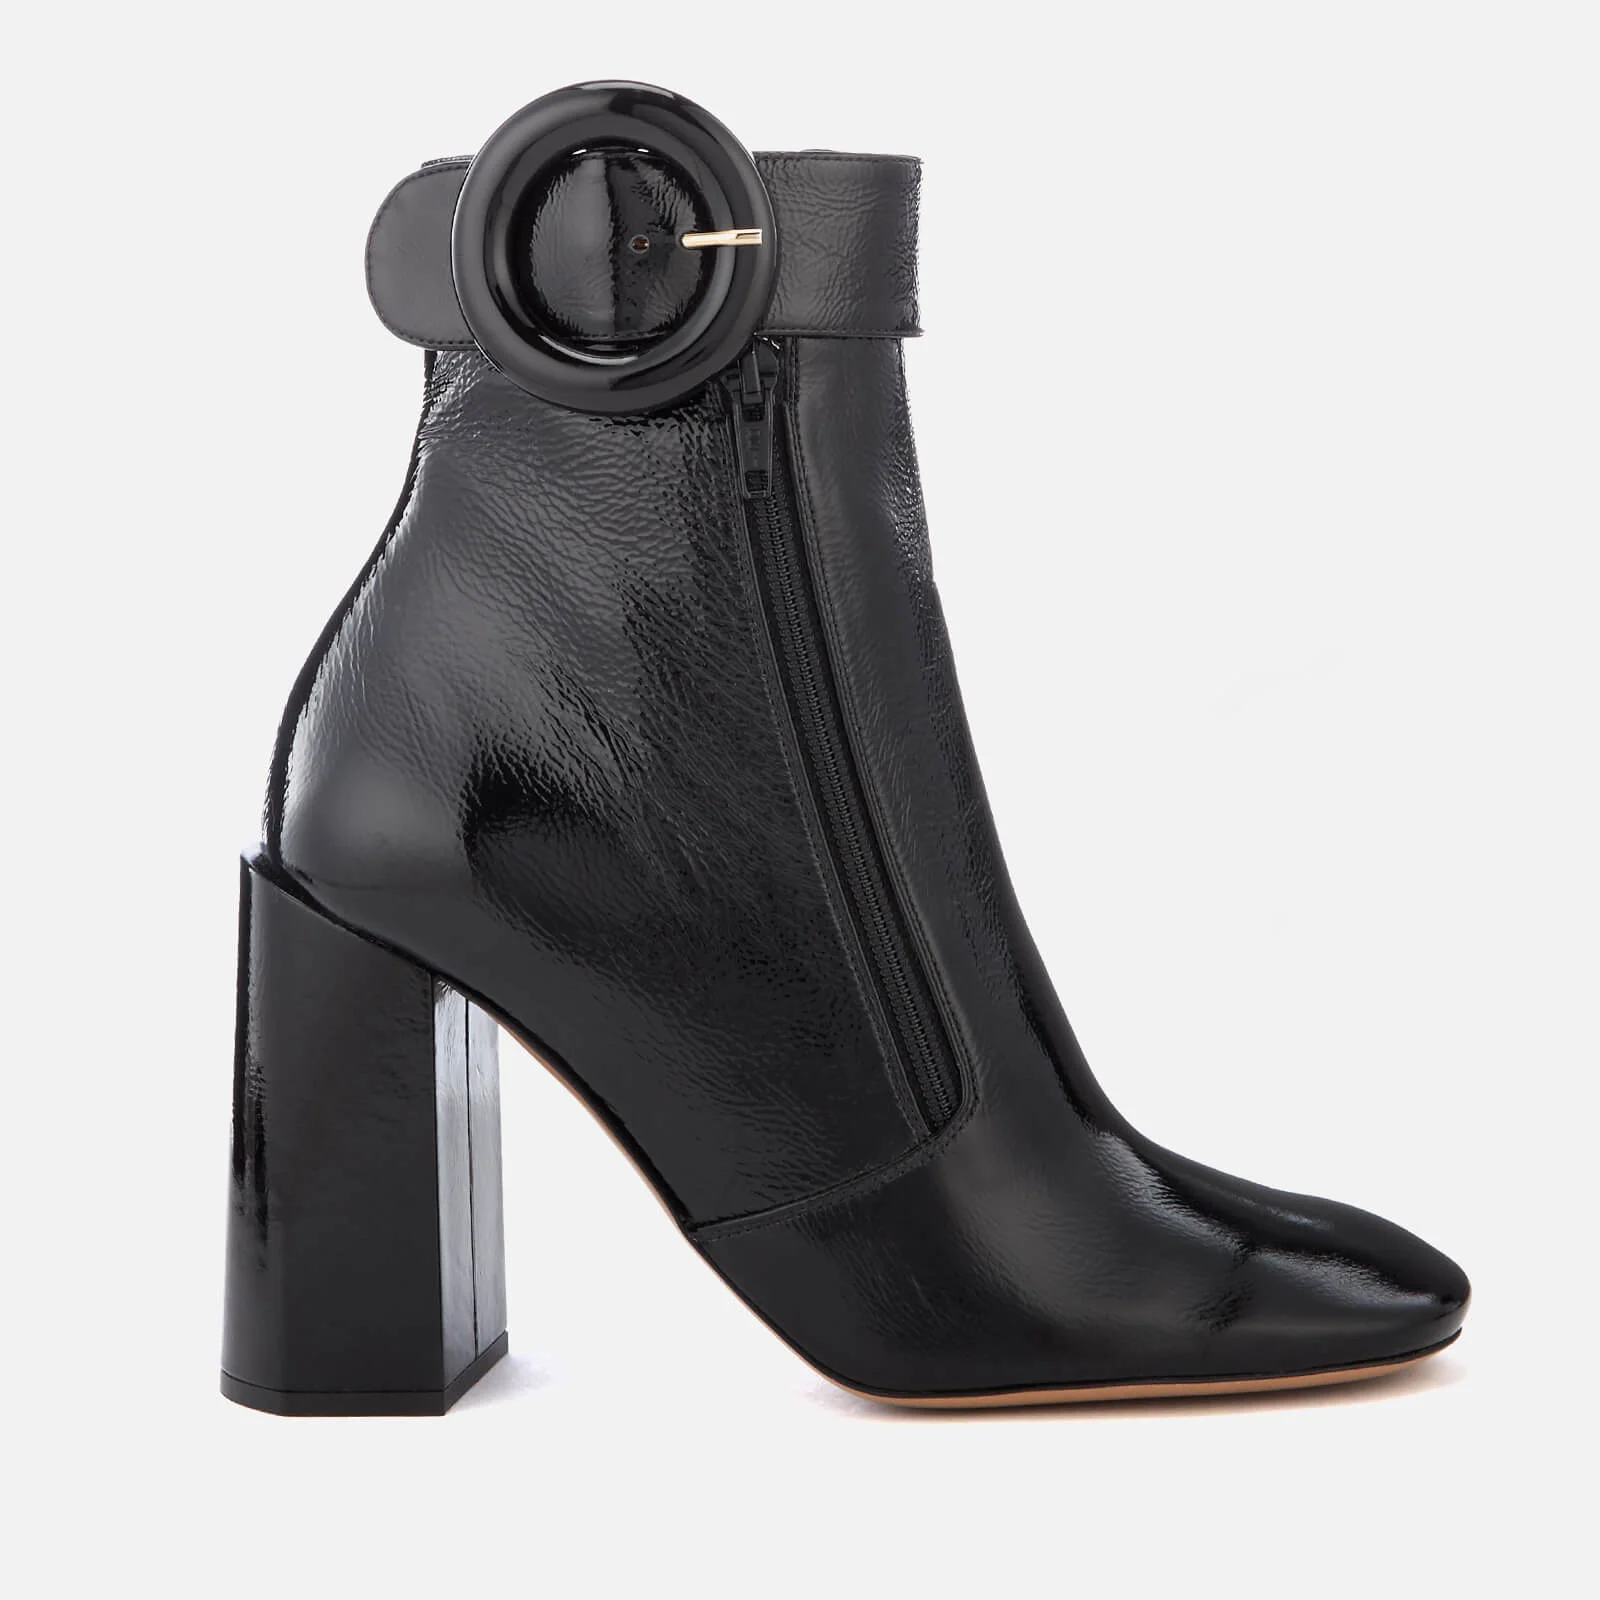 Mulberry Women's Patent Block Heel Ankle Boots - Black Image 1